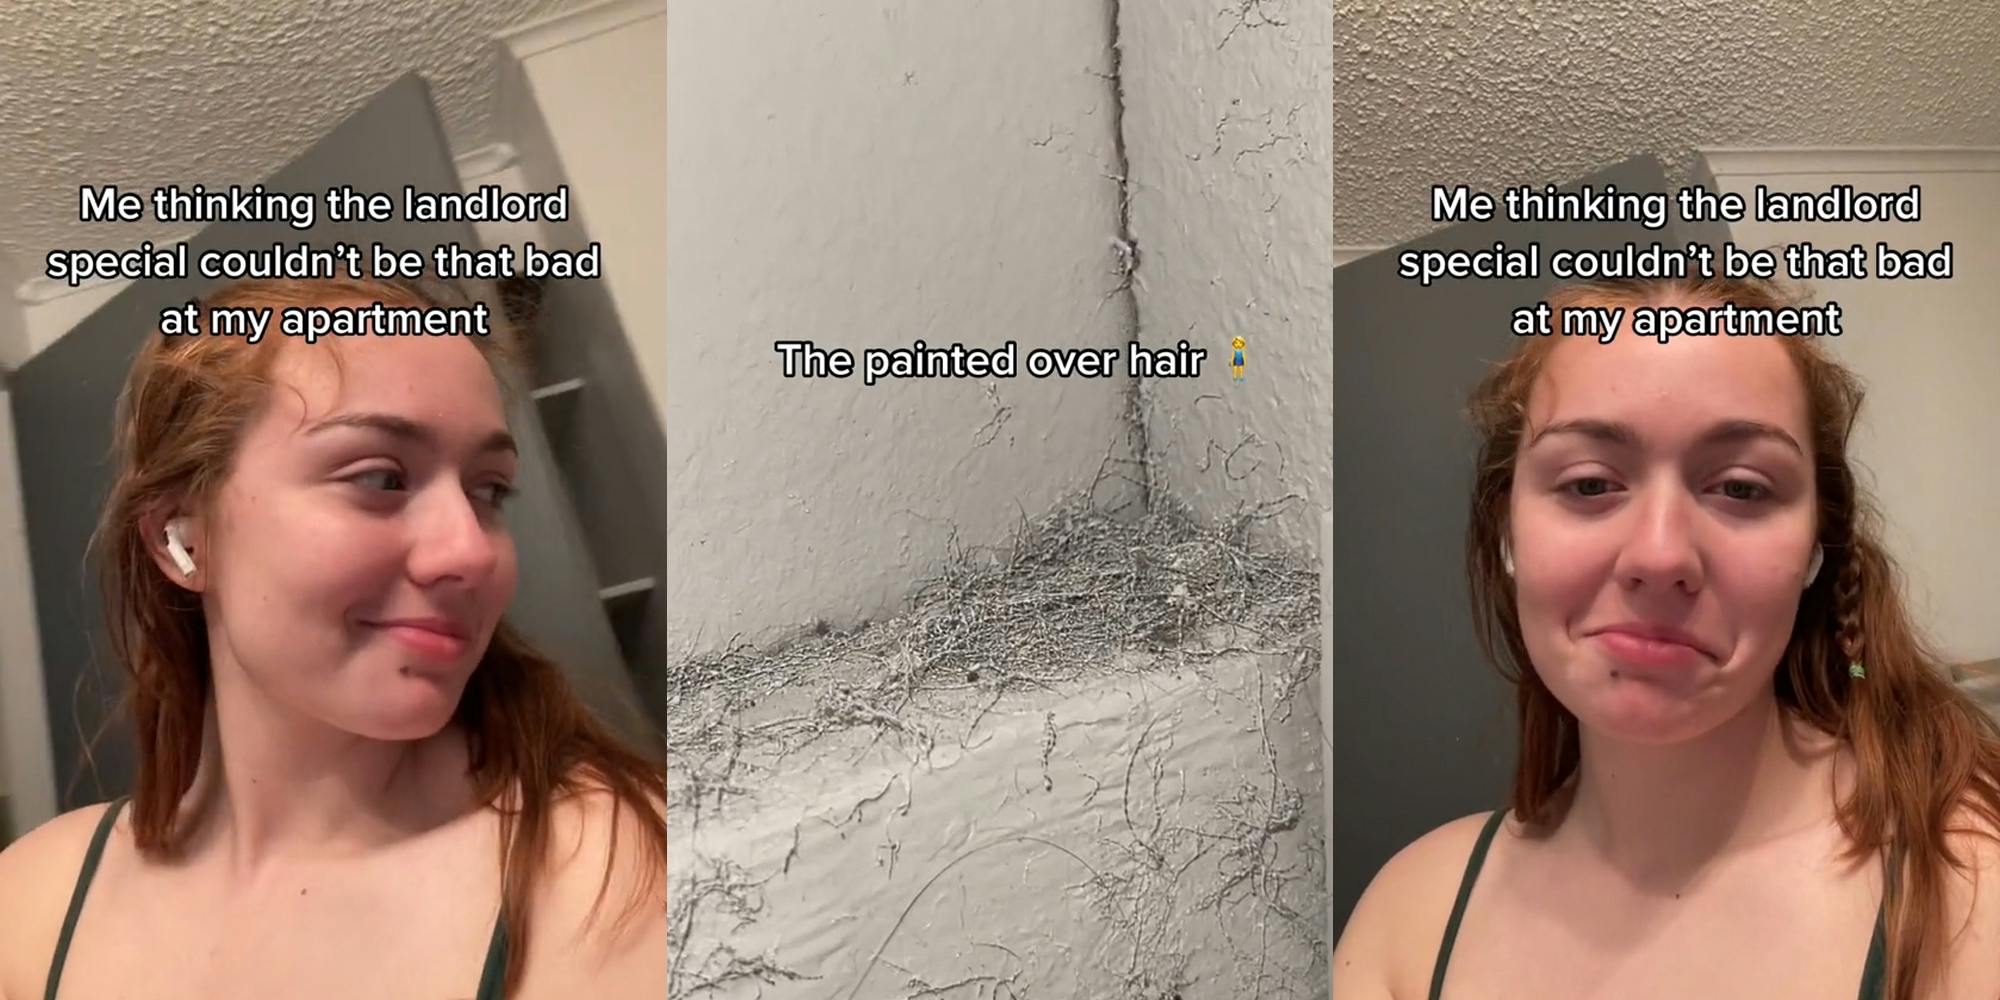 tenant in apartment looking right with caption "Me thinking the landlord special couldn't be that bad at my apartment" (l) hair with paint in corner or walls with caption "The painted over hair" (c) tenant in apartment with caption "Me thinking the landlord special couldn't be that bad at my apartment" (r)